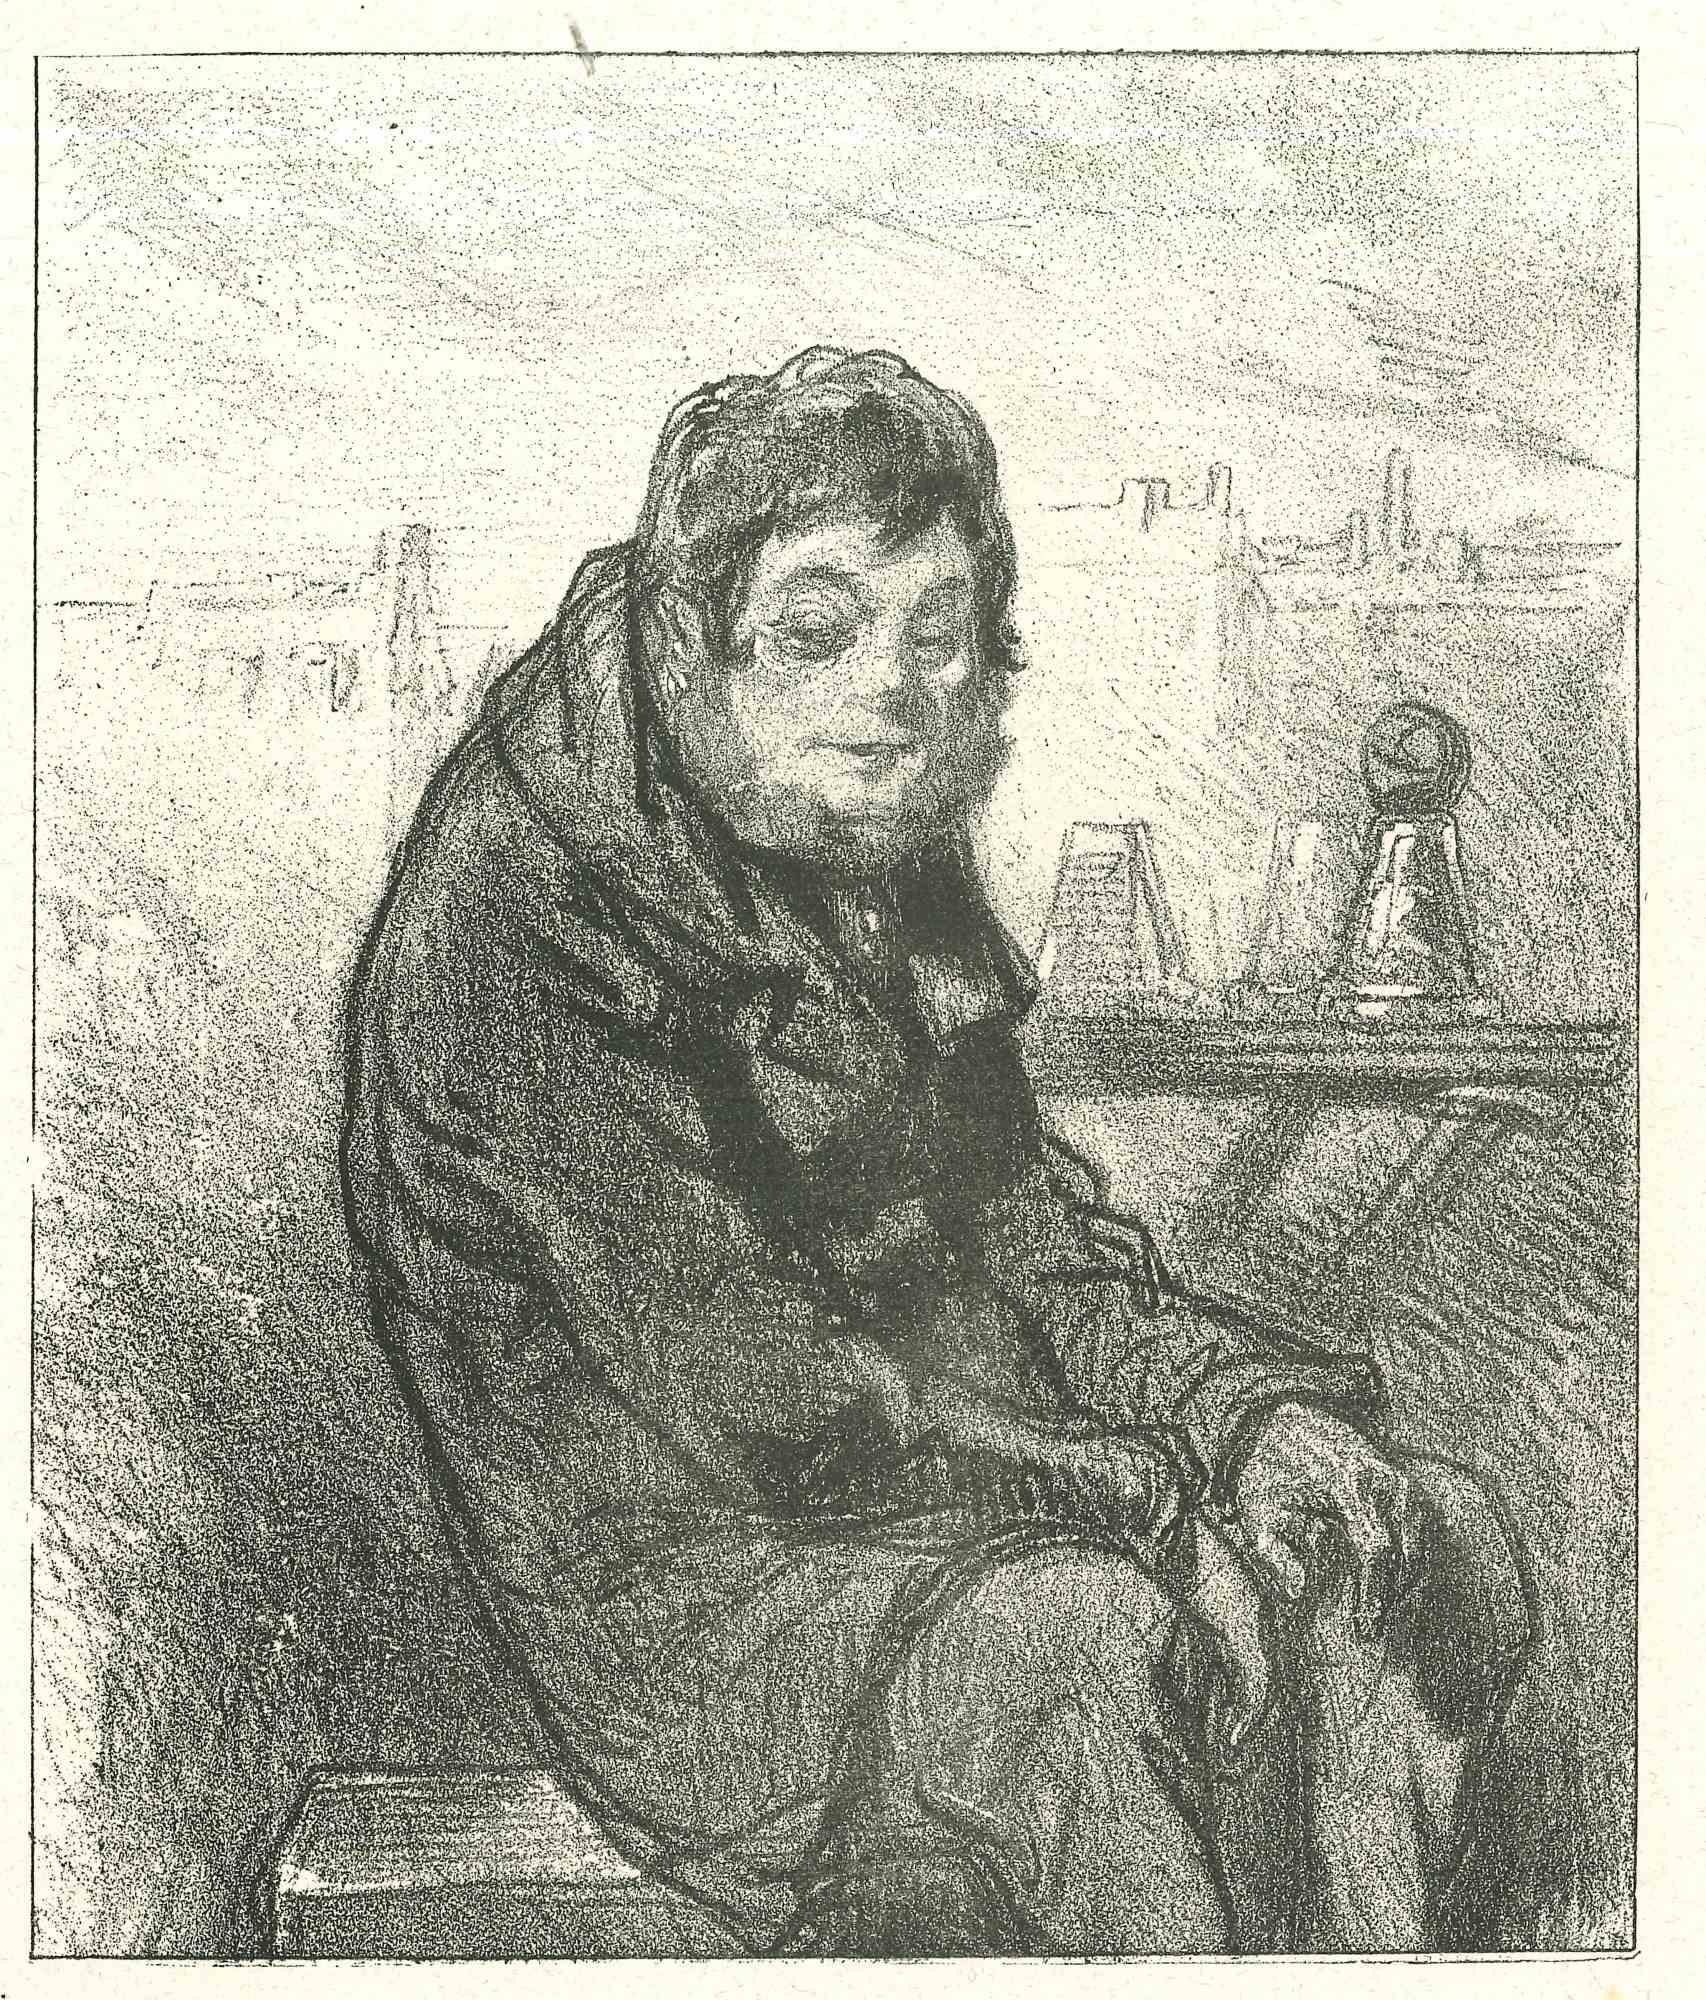 The Solitude is an original lithograph artwork on ivory-colored paper, realized by the French draftsman Paul Gavarni (after) (alias Guillaume Sulpice Chevalier Gavarni, 1804-1866) in Paris, 1881, in the collection of Illustrations for "La Mascarade